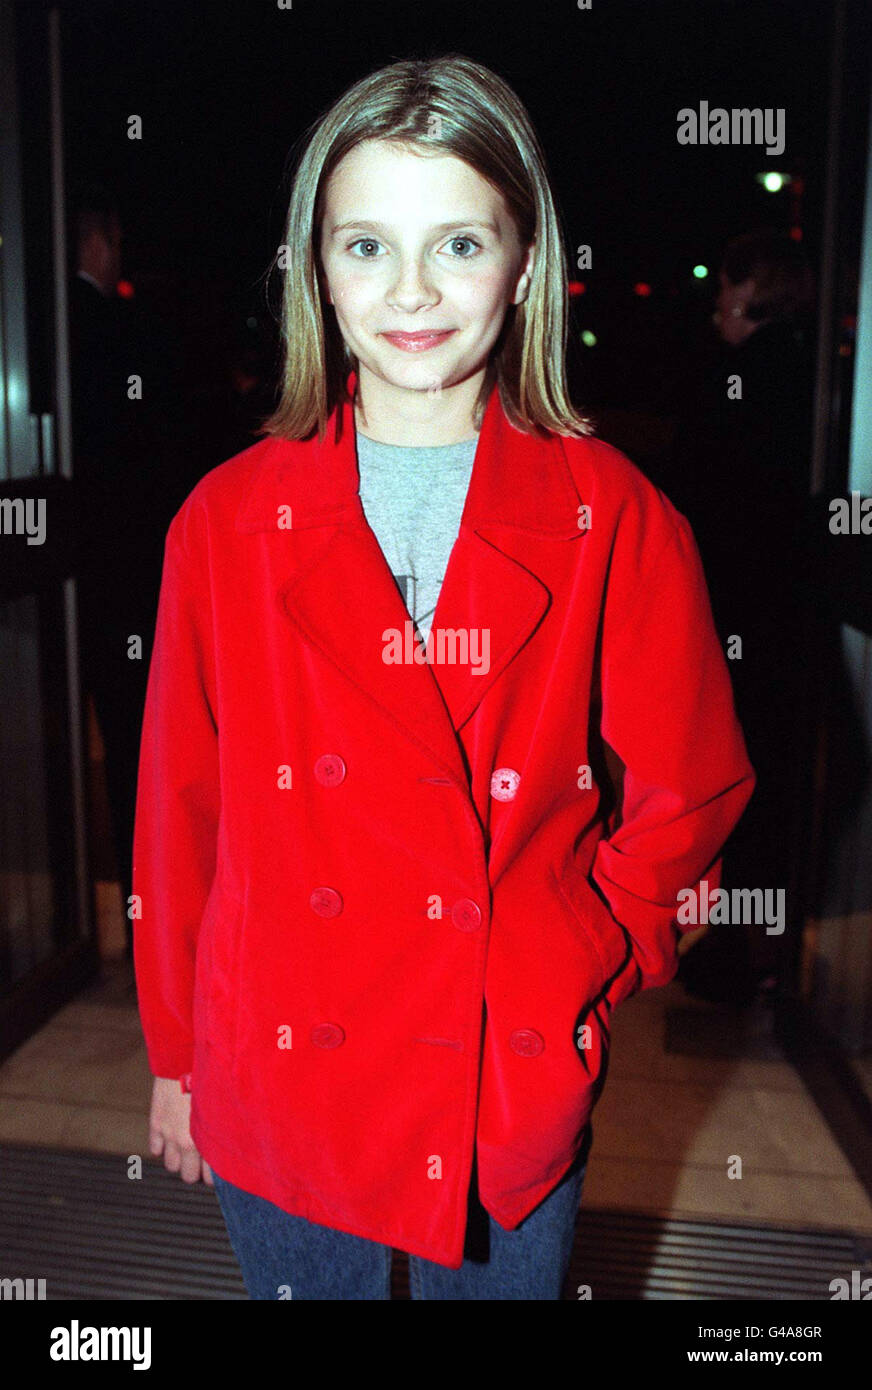 Mischa Barton, the 11-year-old British-born star of 'Lawn Dogs' attended tonight's London Film Festival premier. Unfortunately she won't be able to watch the screening as the film is a 15 certificate. Photo by Fiona Hanson/PA. Stock Photo